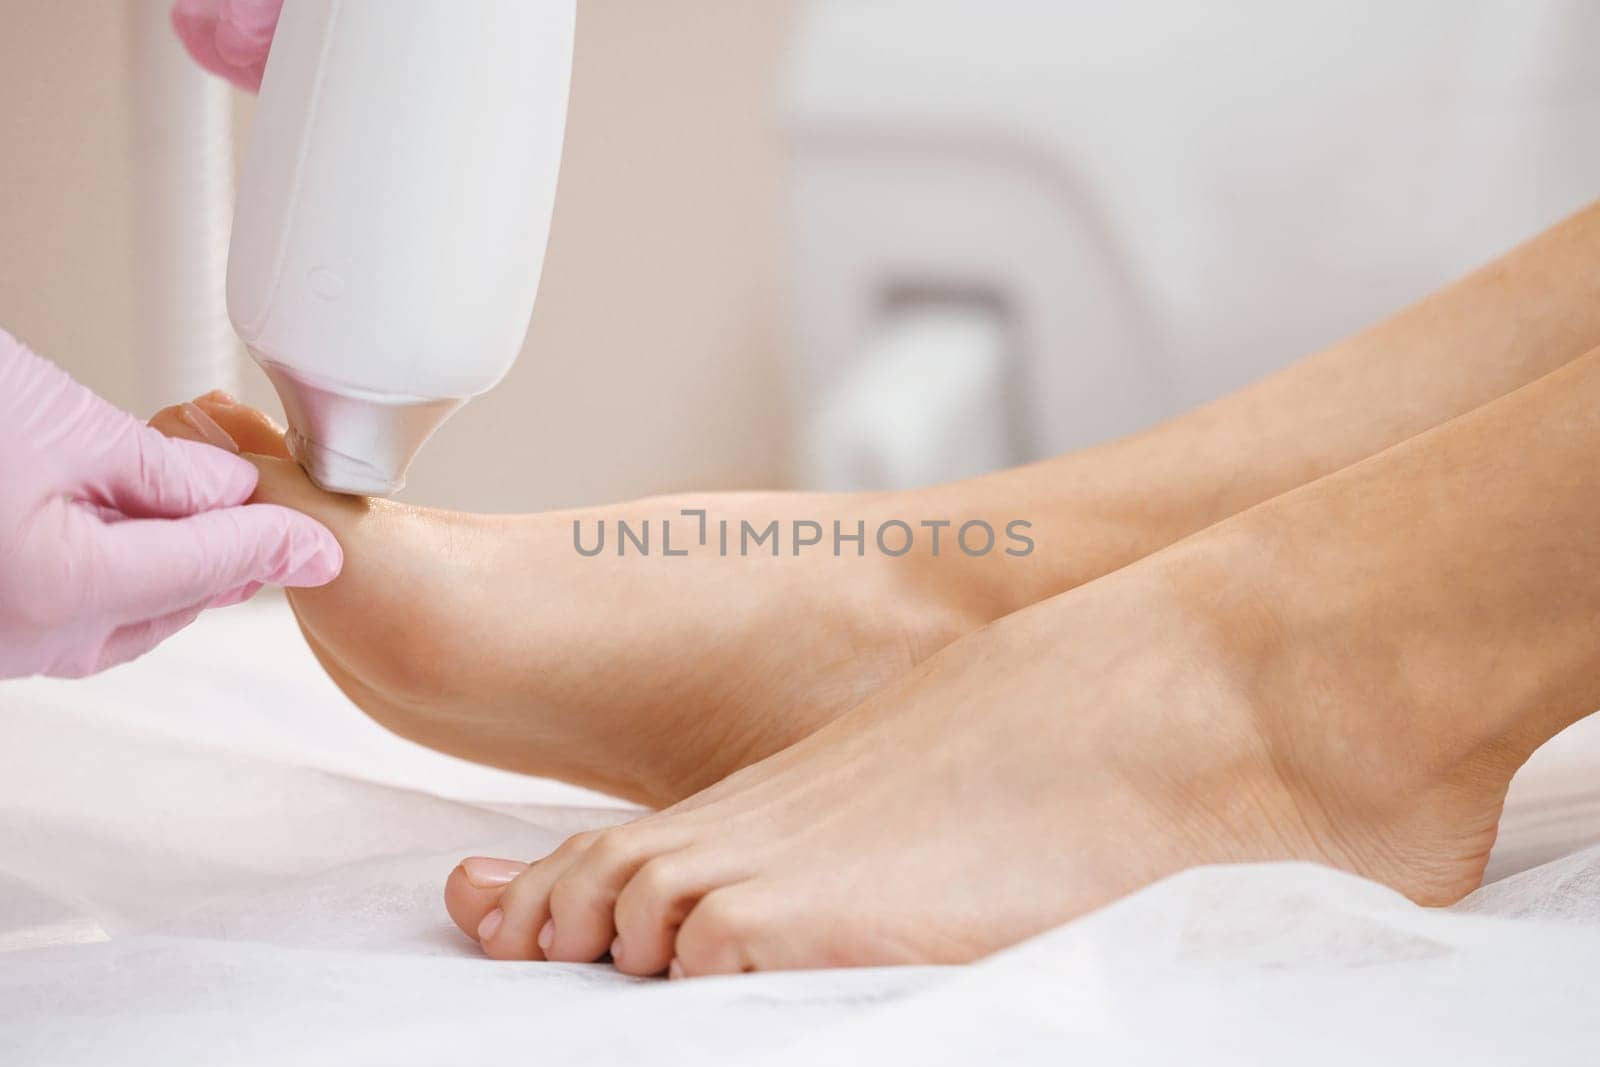 The doctor makes the procedure for the treatment of foot fungus. Patient receiving laser therapy for a toenail. Fungal infection on the nails. Treatment of onychomycosis with a medical laser by uflypro